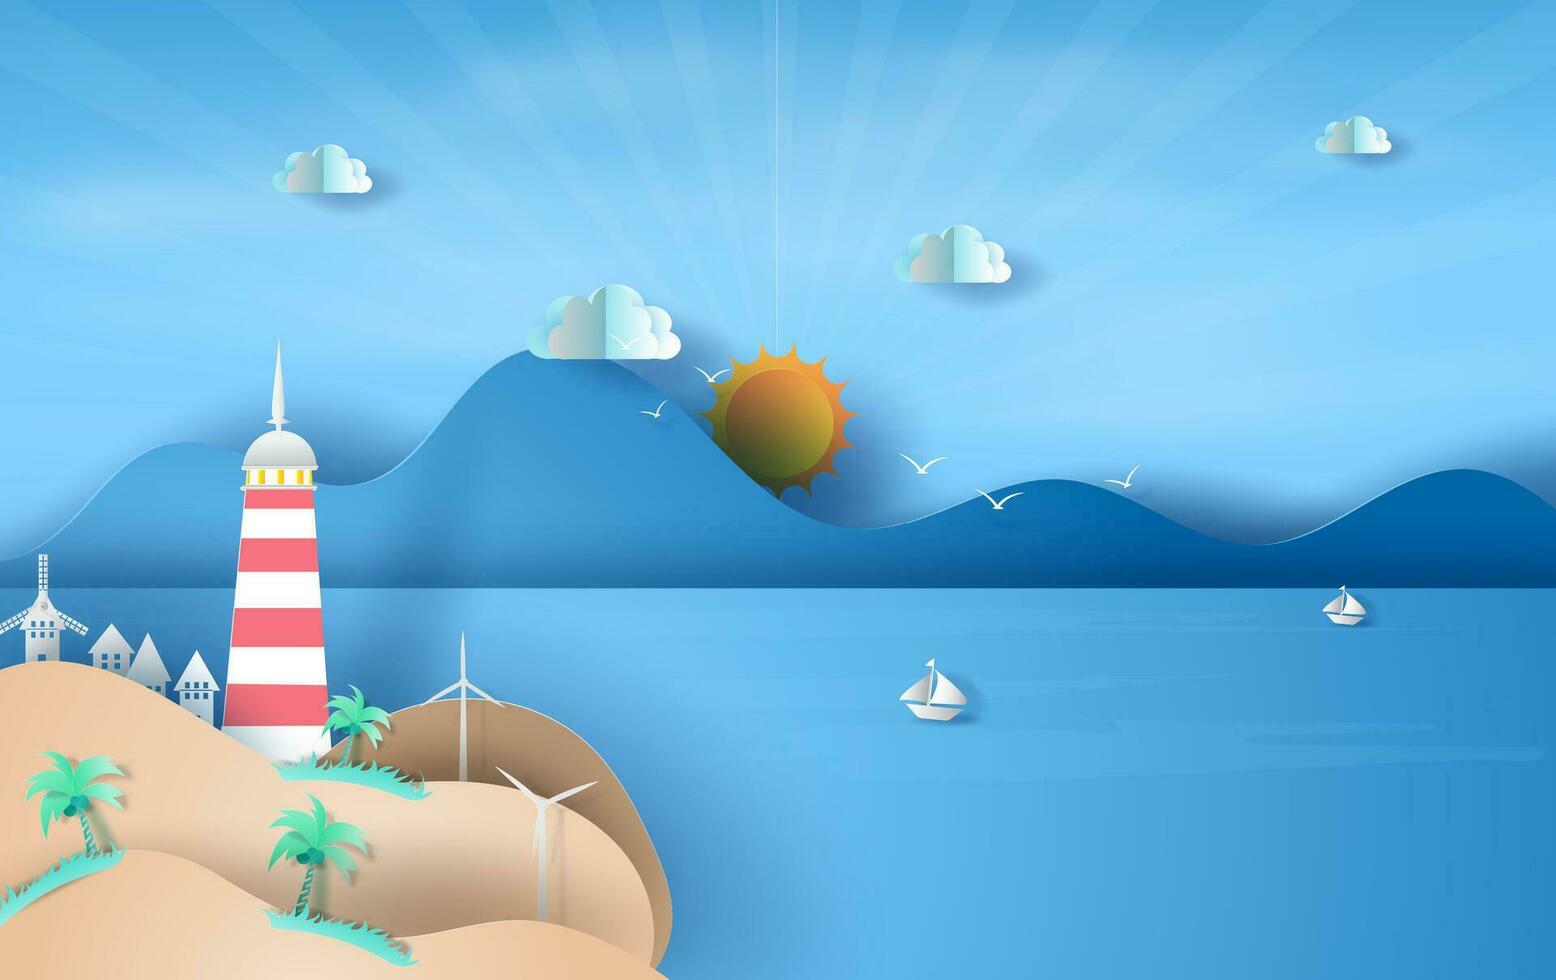 illustration of Island with lighthouse on sea view sunlight blue sky,Summer time season concept,Boat floating in the sea on blue sky.Graphic design Seaside landscape, Paper craft and cut idea,vector. vector